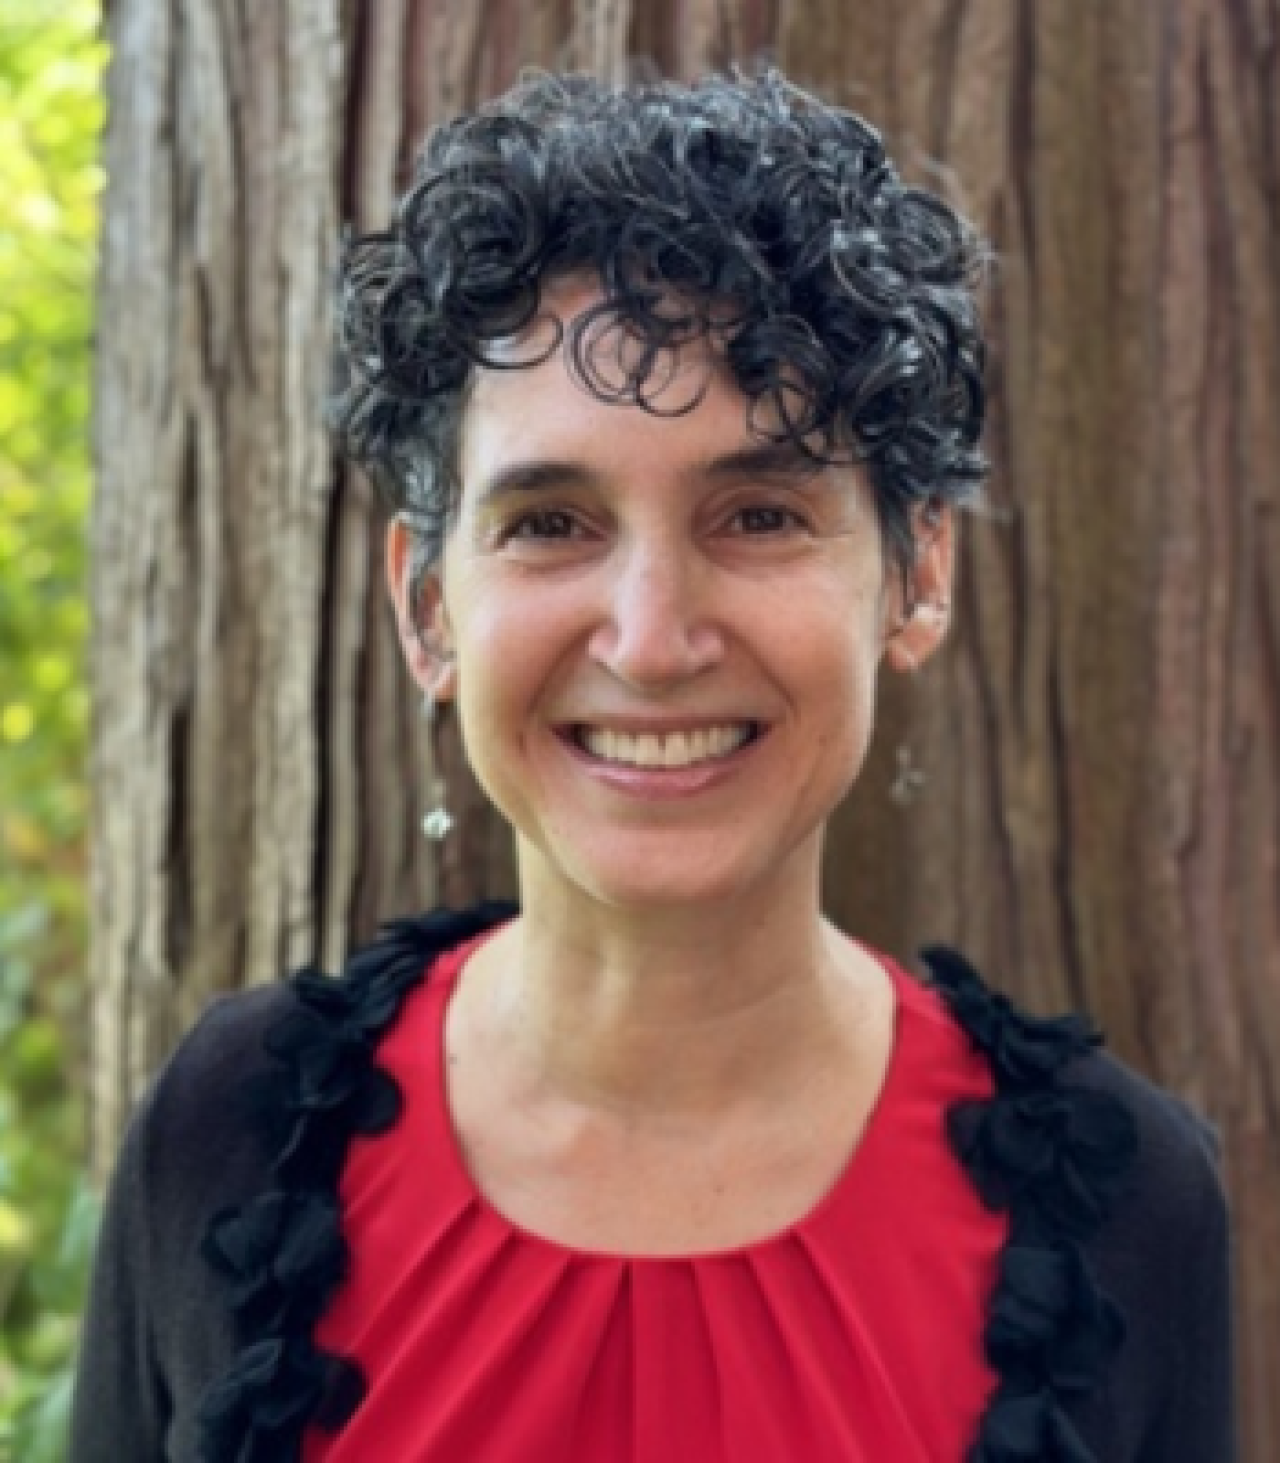 Tanya Wahbe, PhD's profile picture